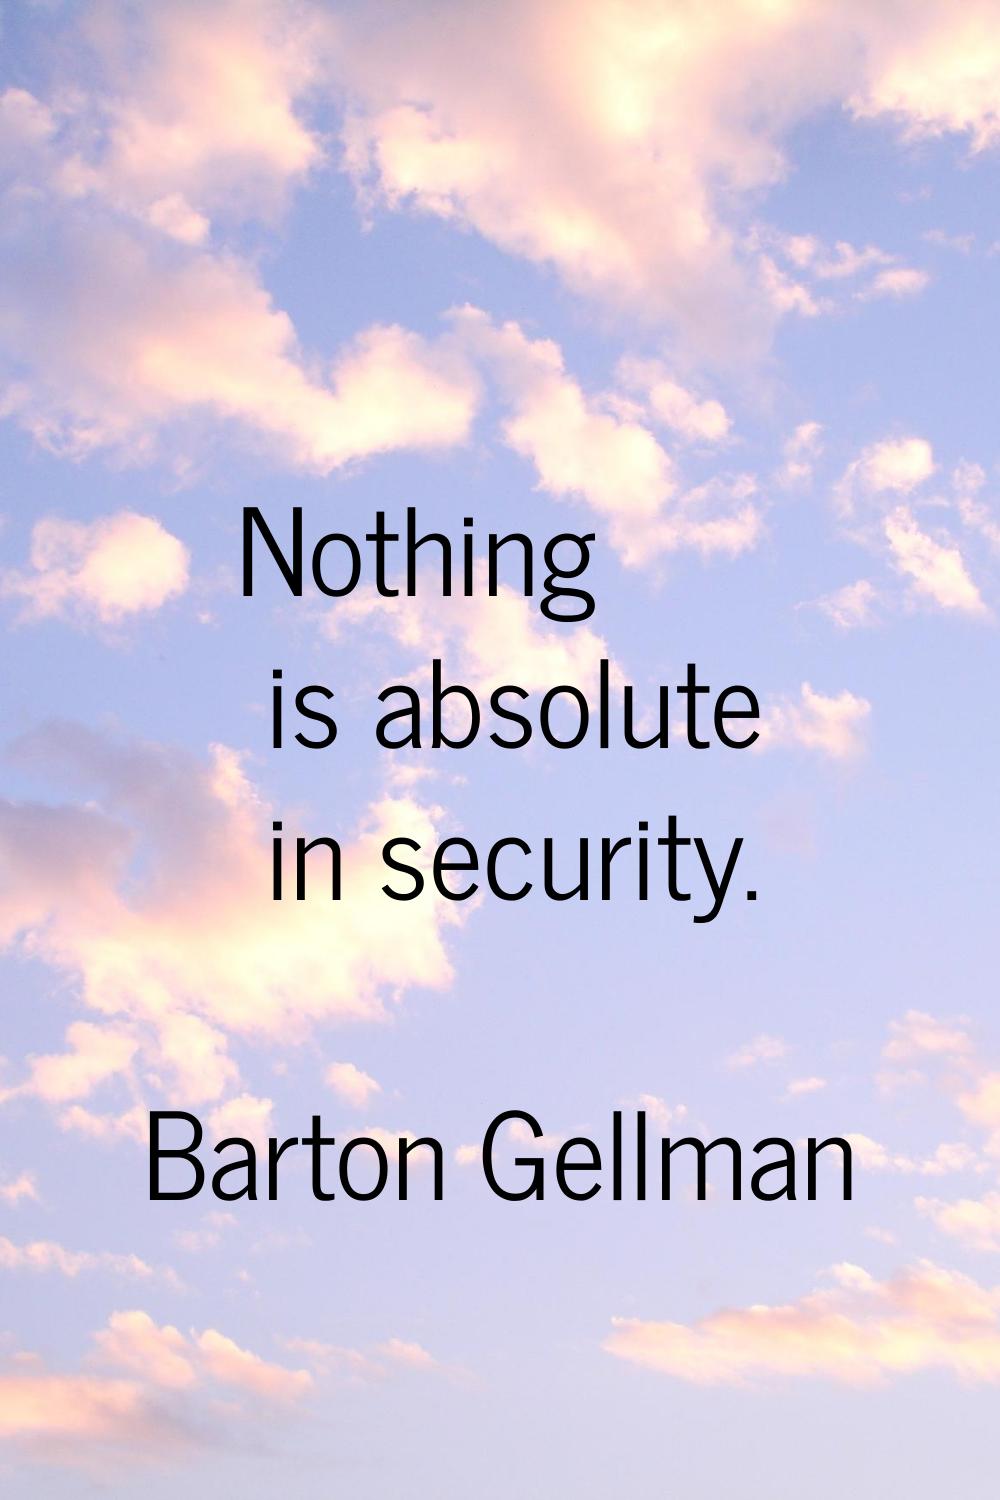 Nothing is absolute in security.